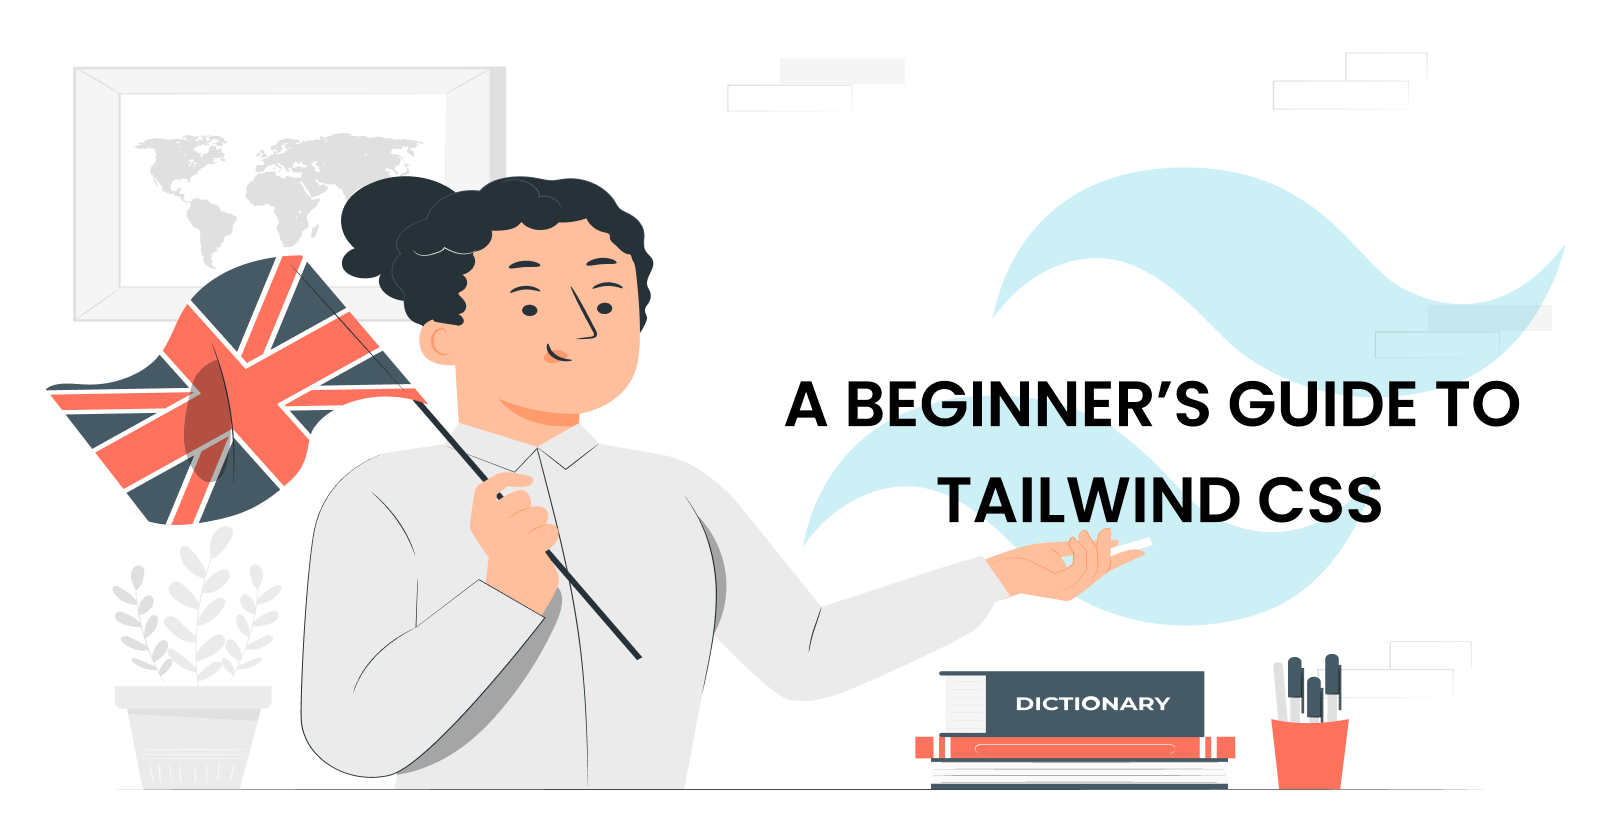 A Beginner's Guide to Tailwind CSS